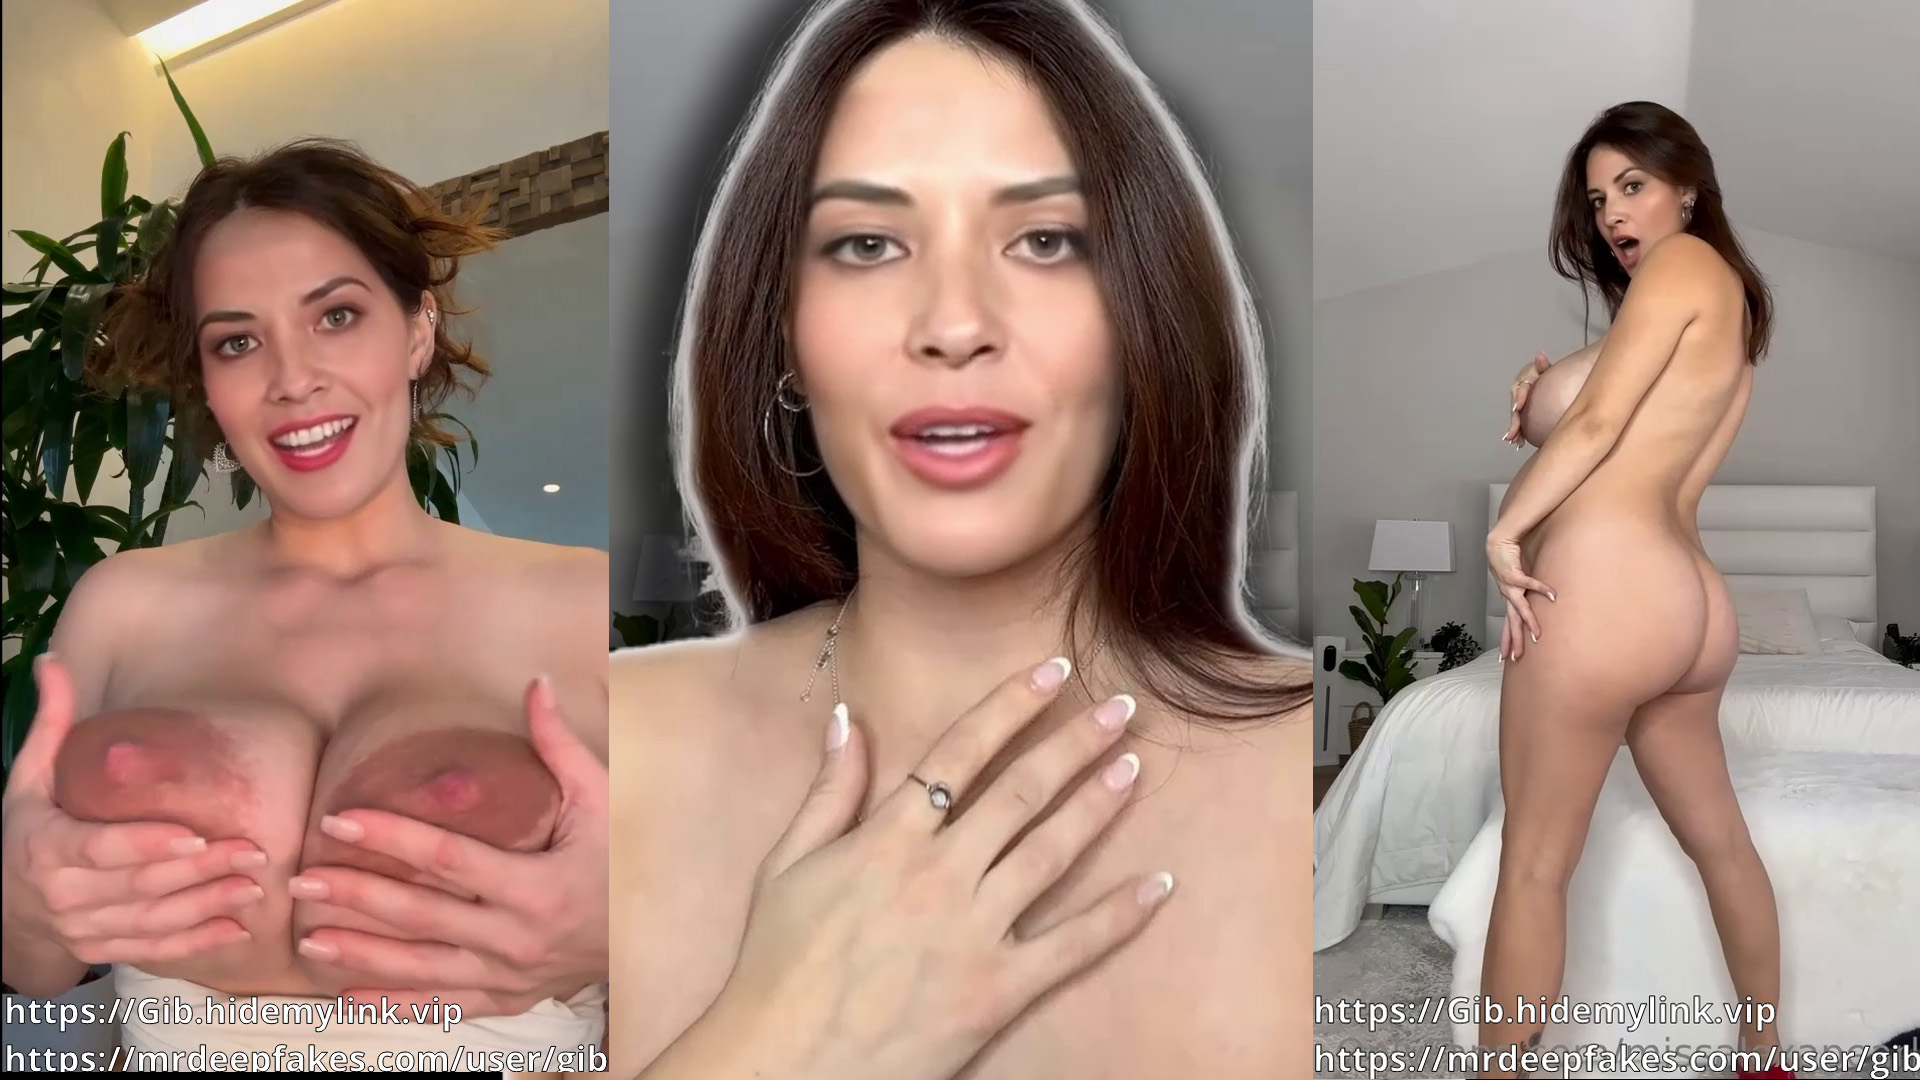 Olivia Munn's Glorious Tits Revived From The Dead! (FULL)